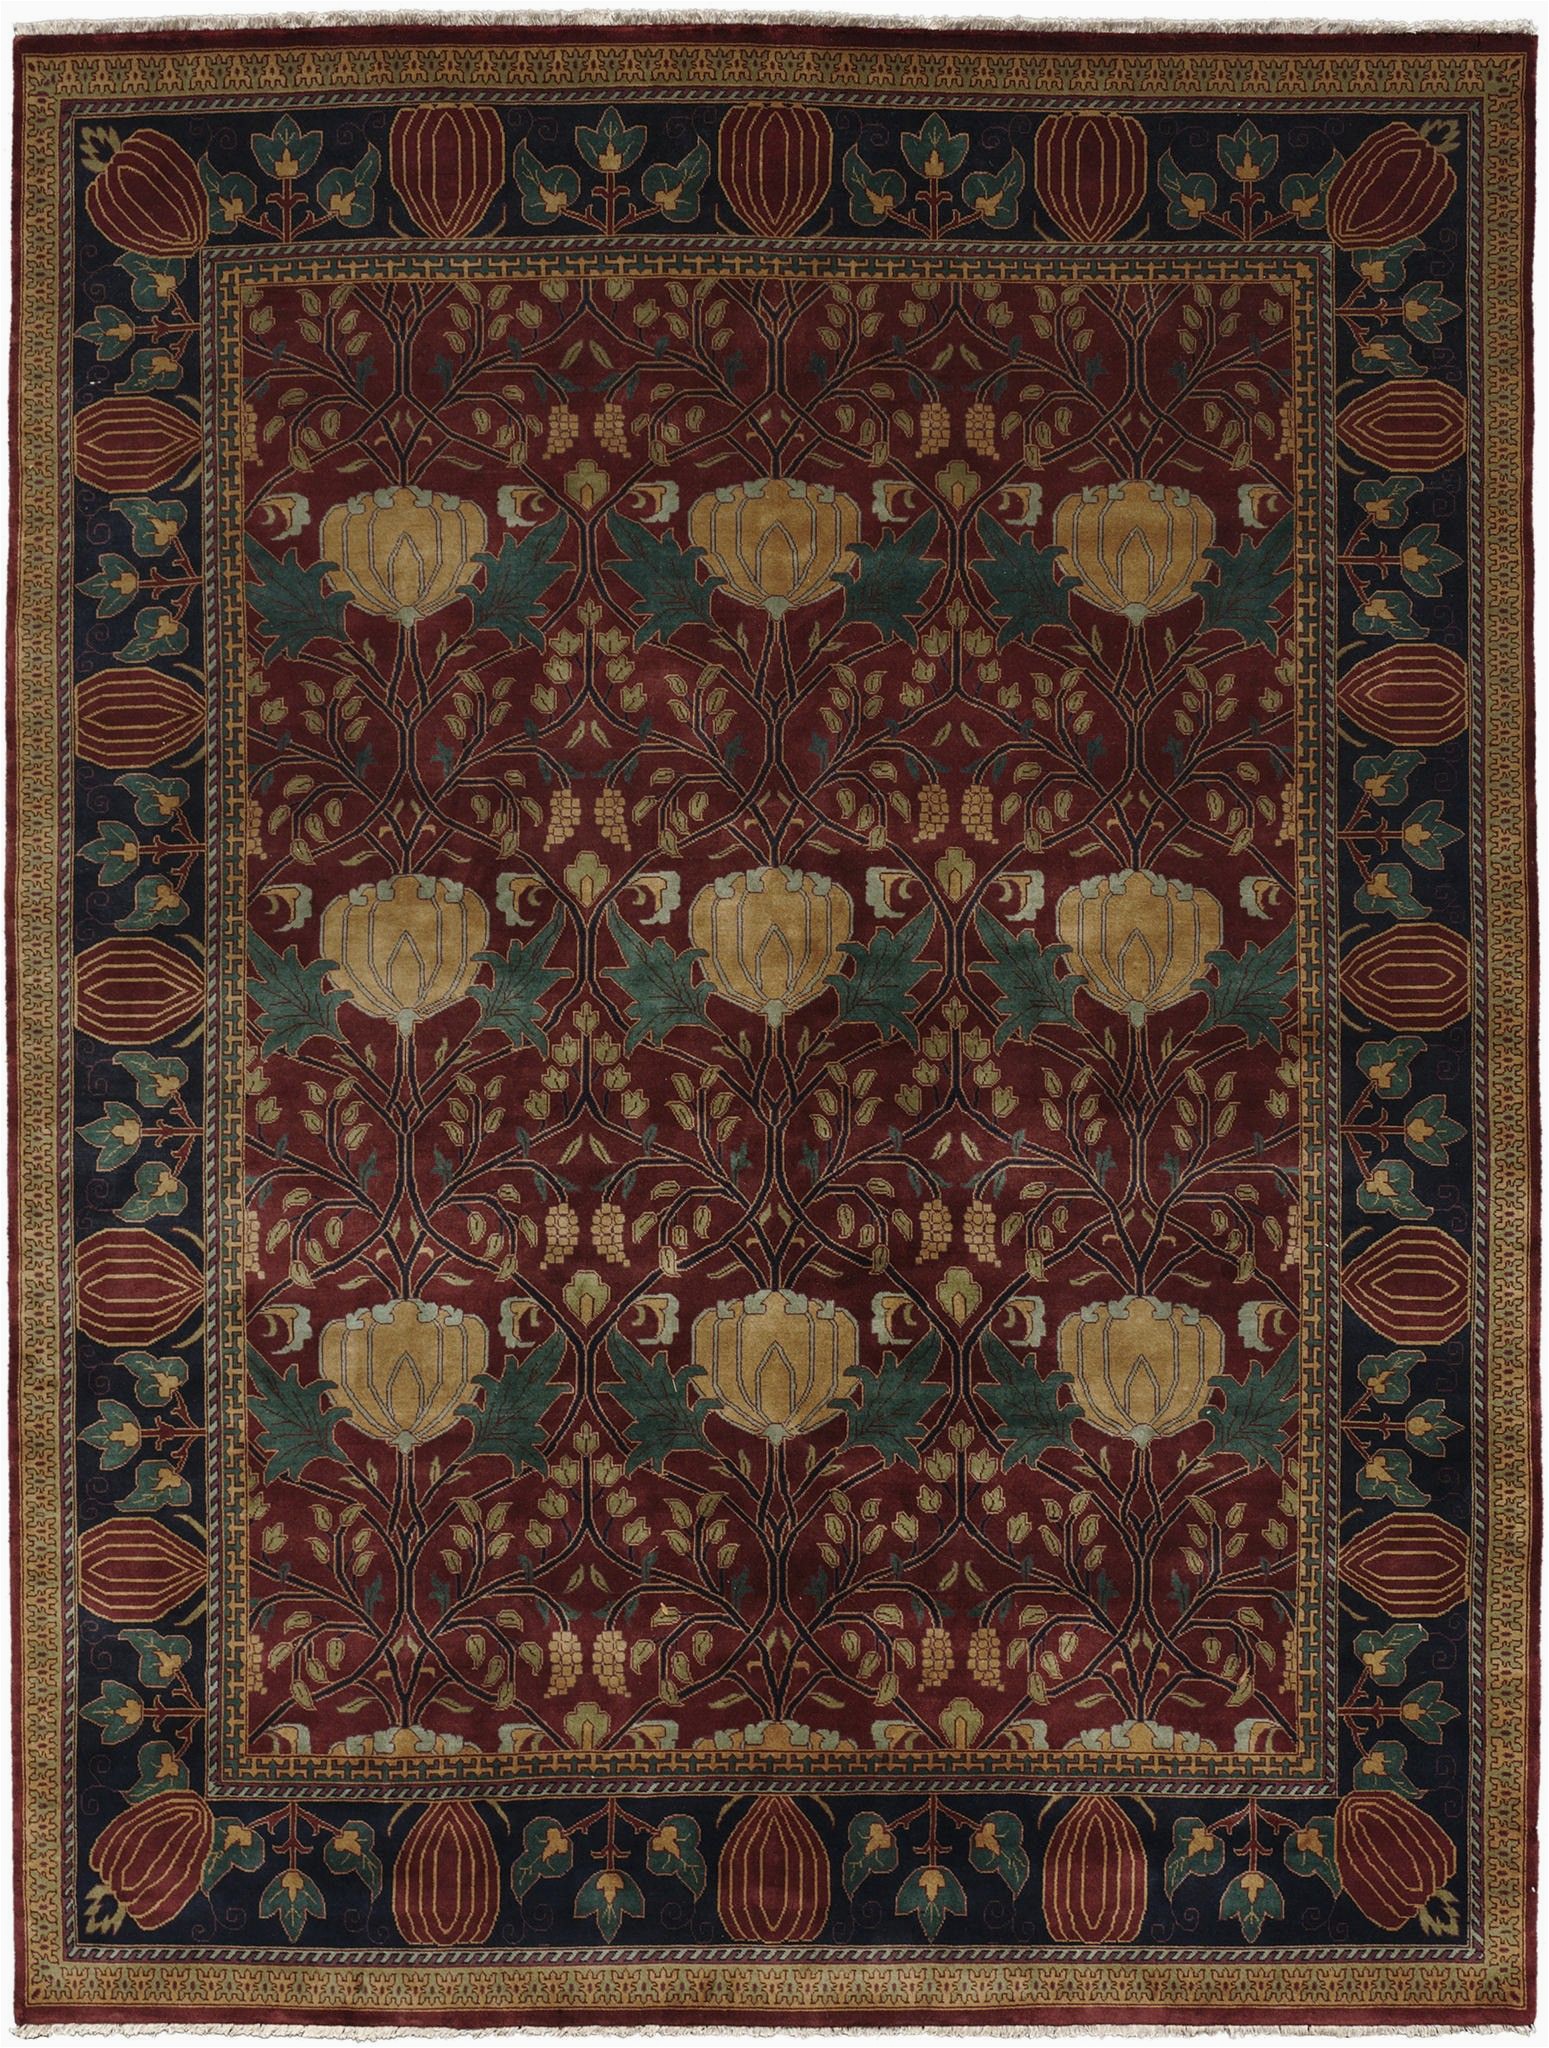 Mission Style area Rugs for Sale the Oak Park Rug Pc 7a Arts and Crafts Persian Carpets